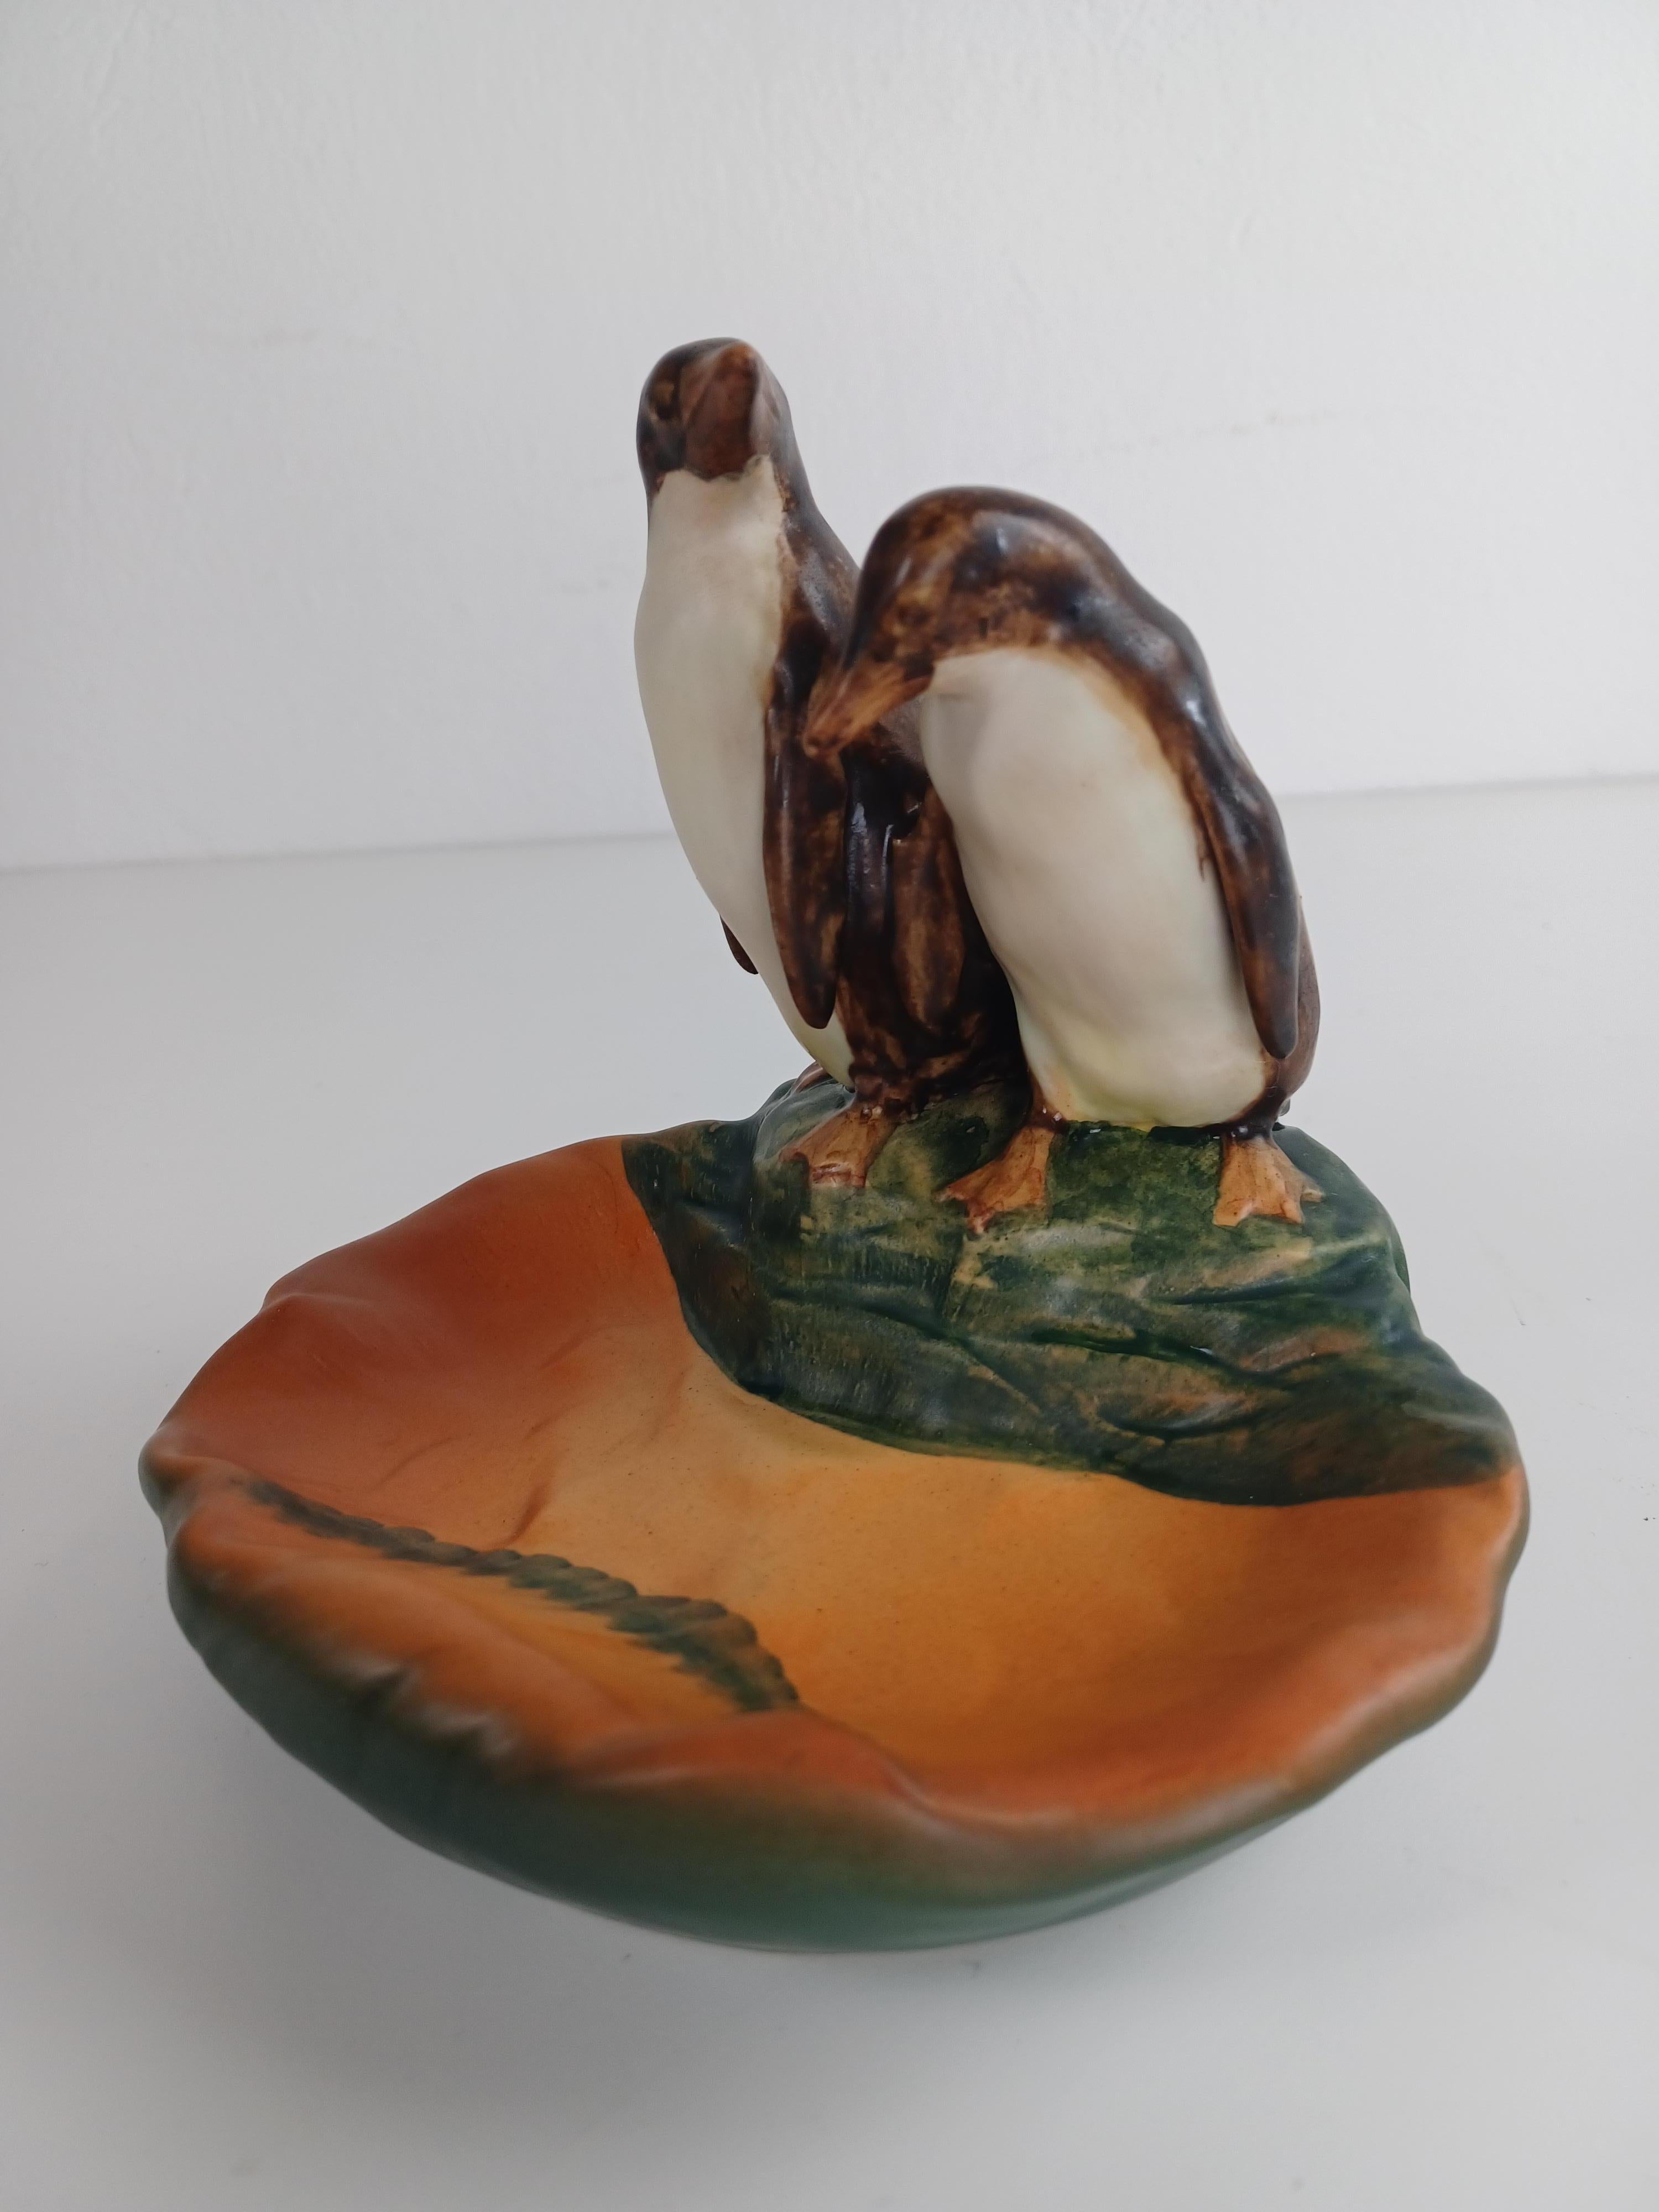 Danish hand-crafted Art Nouveau penguin ash tray / bowl designed by Lauritz Jensen in 1923 for P. Ipsens Enke.

The art nuveau ash tray / bowl feature a couple of lively penguins and is in excellent condition.

Ipsens Enke (1843 - 1955) was a very